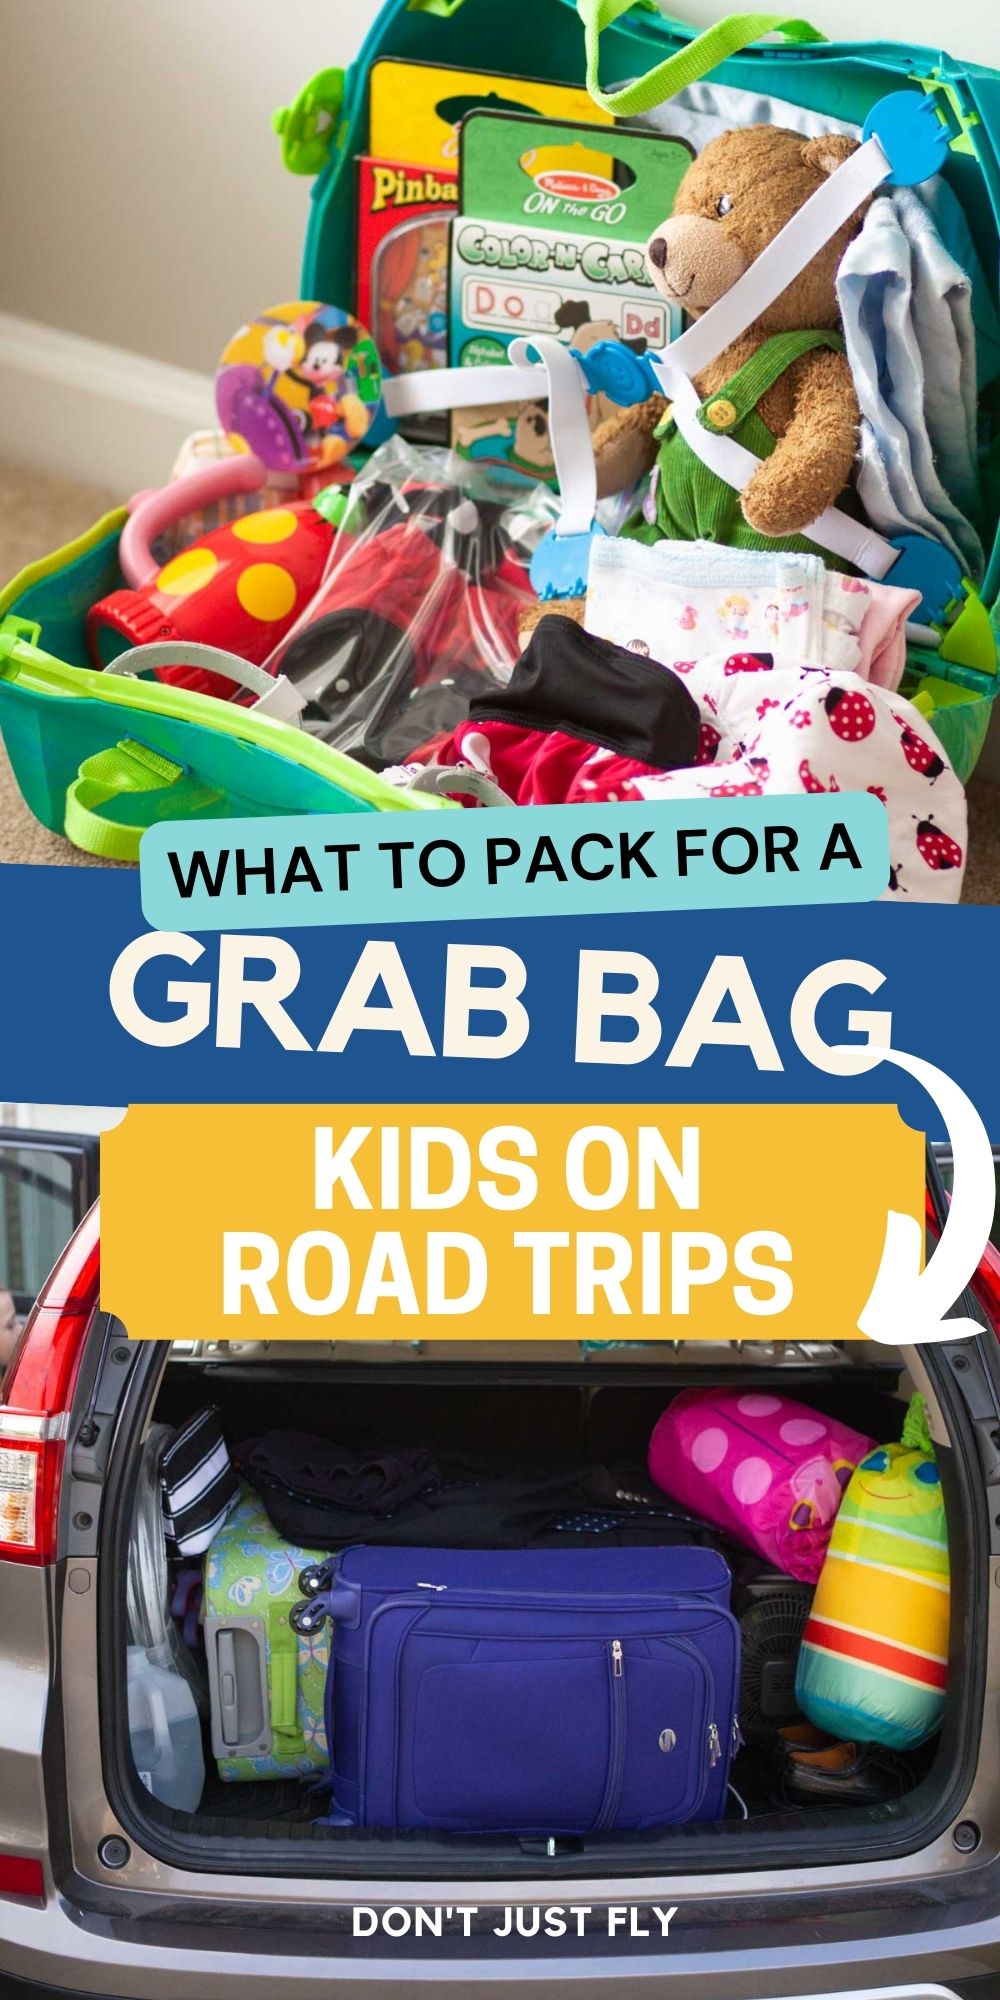 The photos show a peek of what to pack for kids on a road trip and the back of the trunk filled with bags.